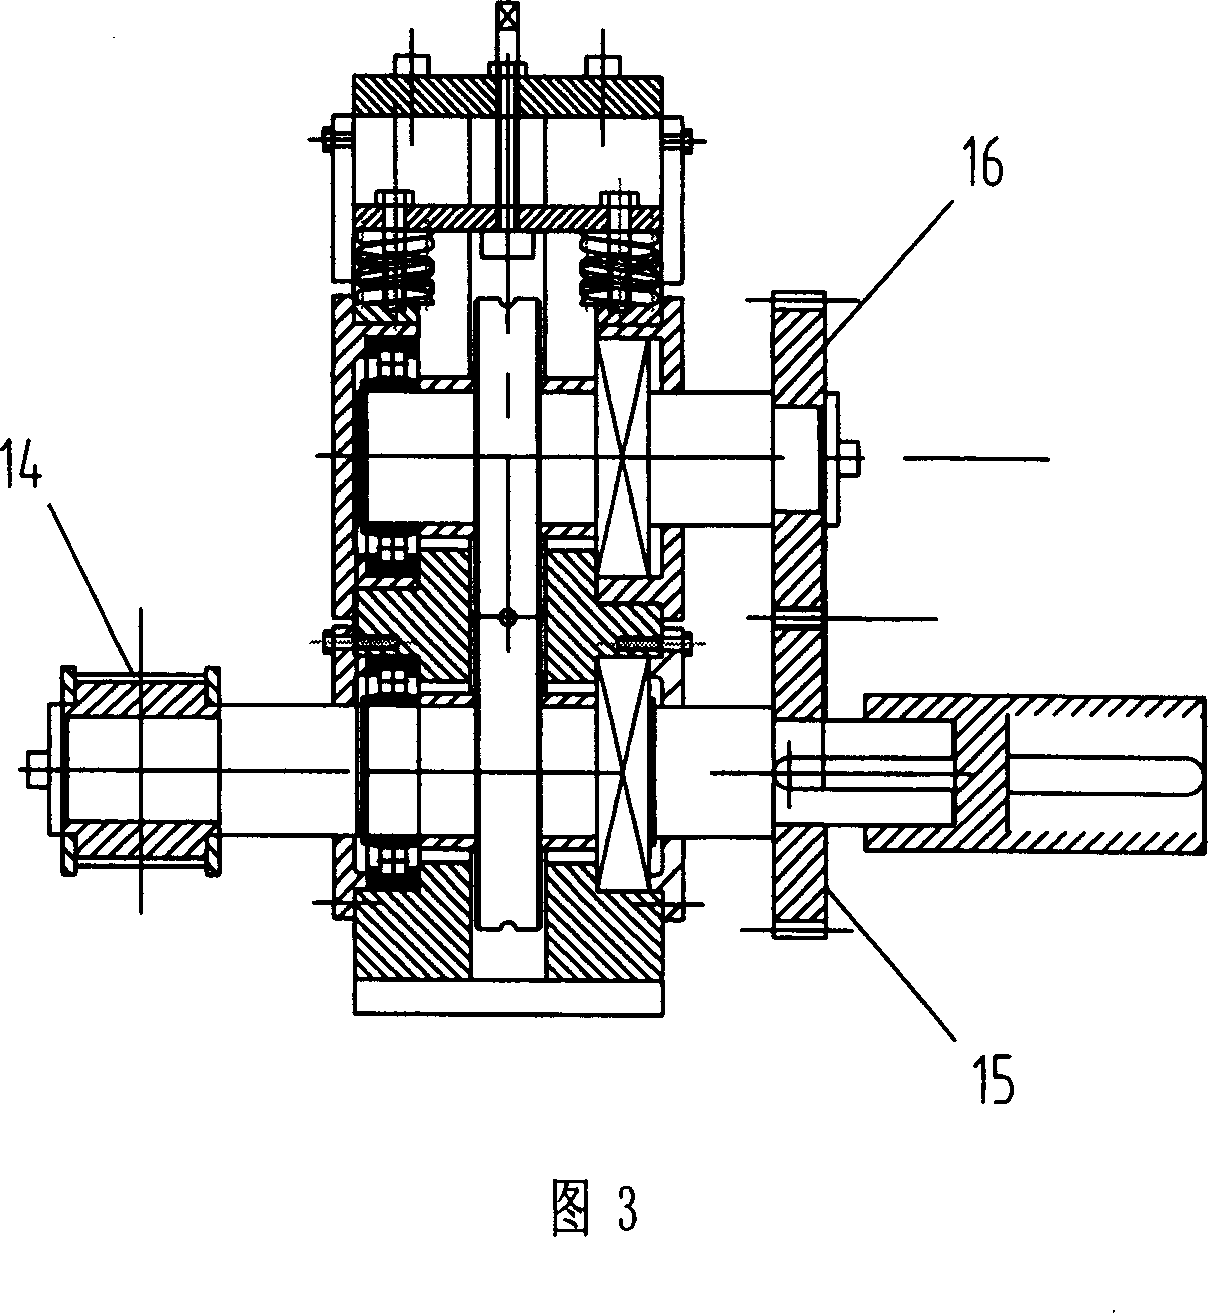 Intelligent no-mold drawing formation apparatus and process